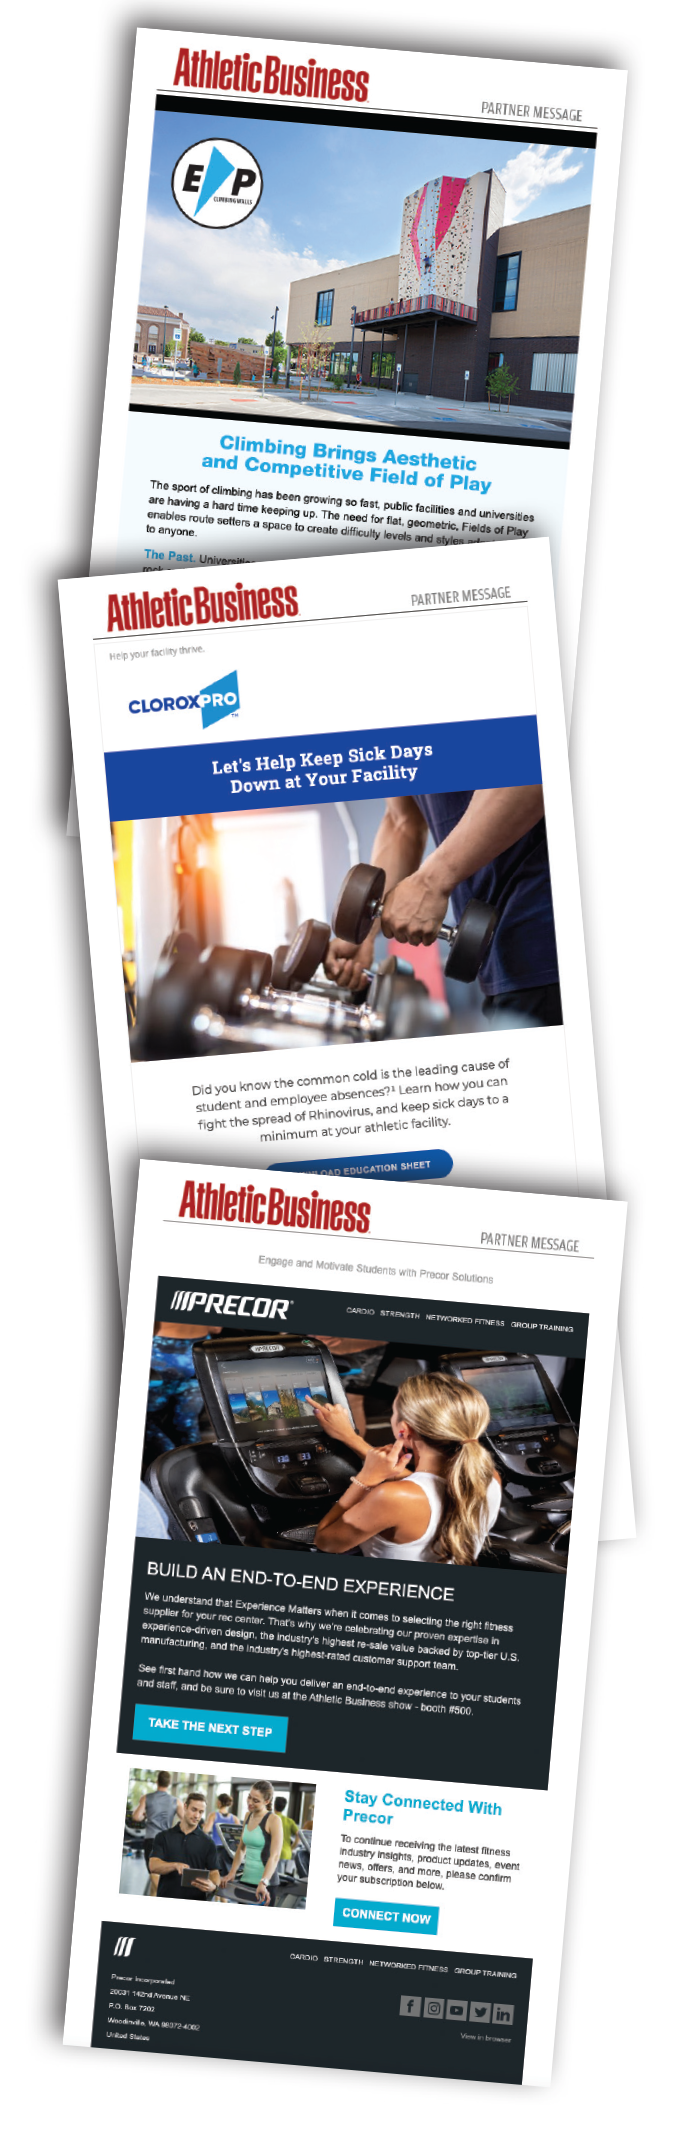 Athletic Business Custom E-Mail Examples